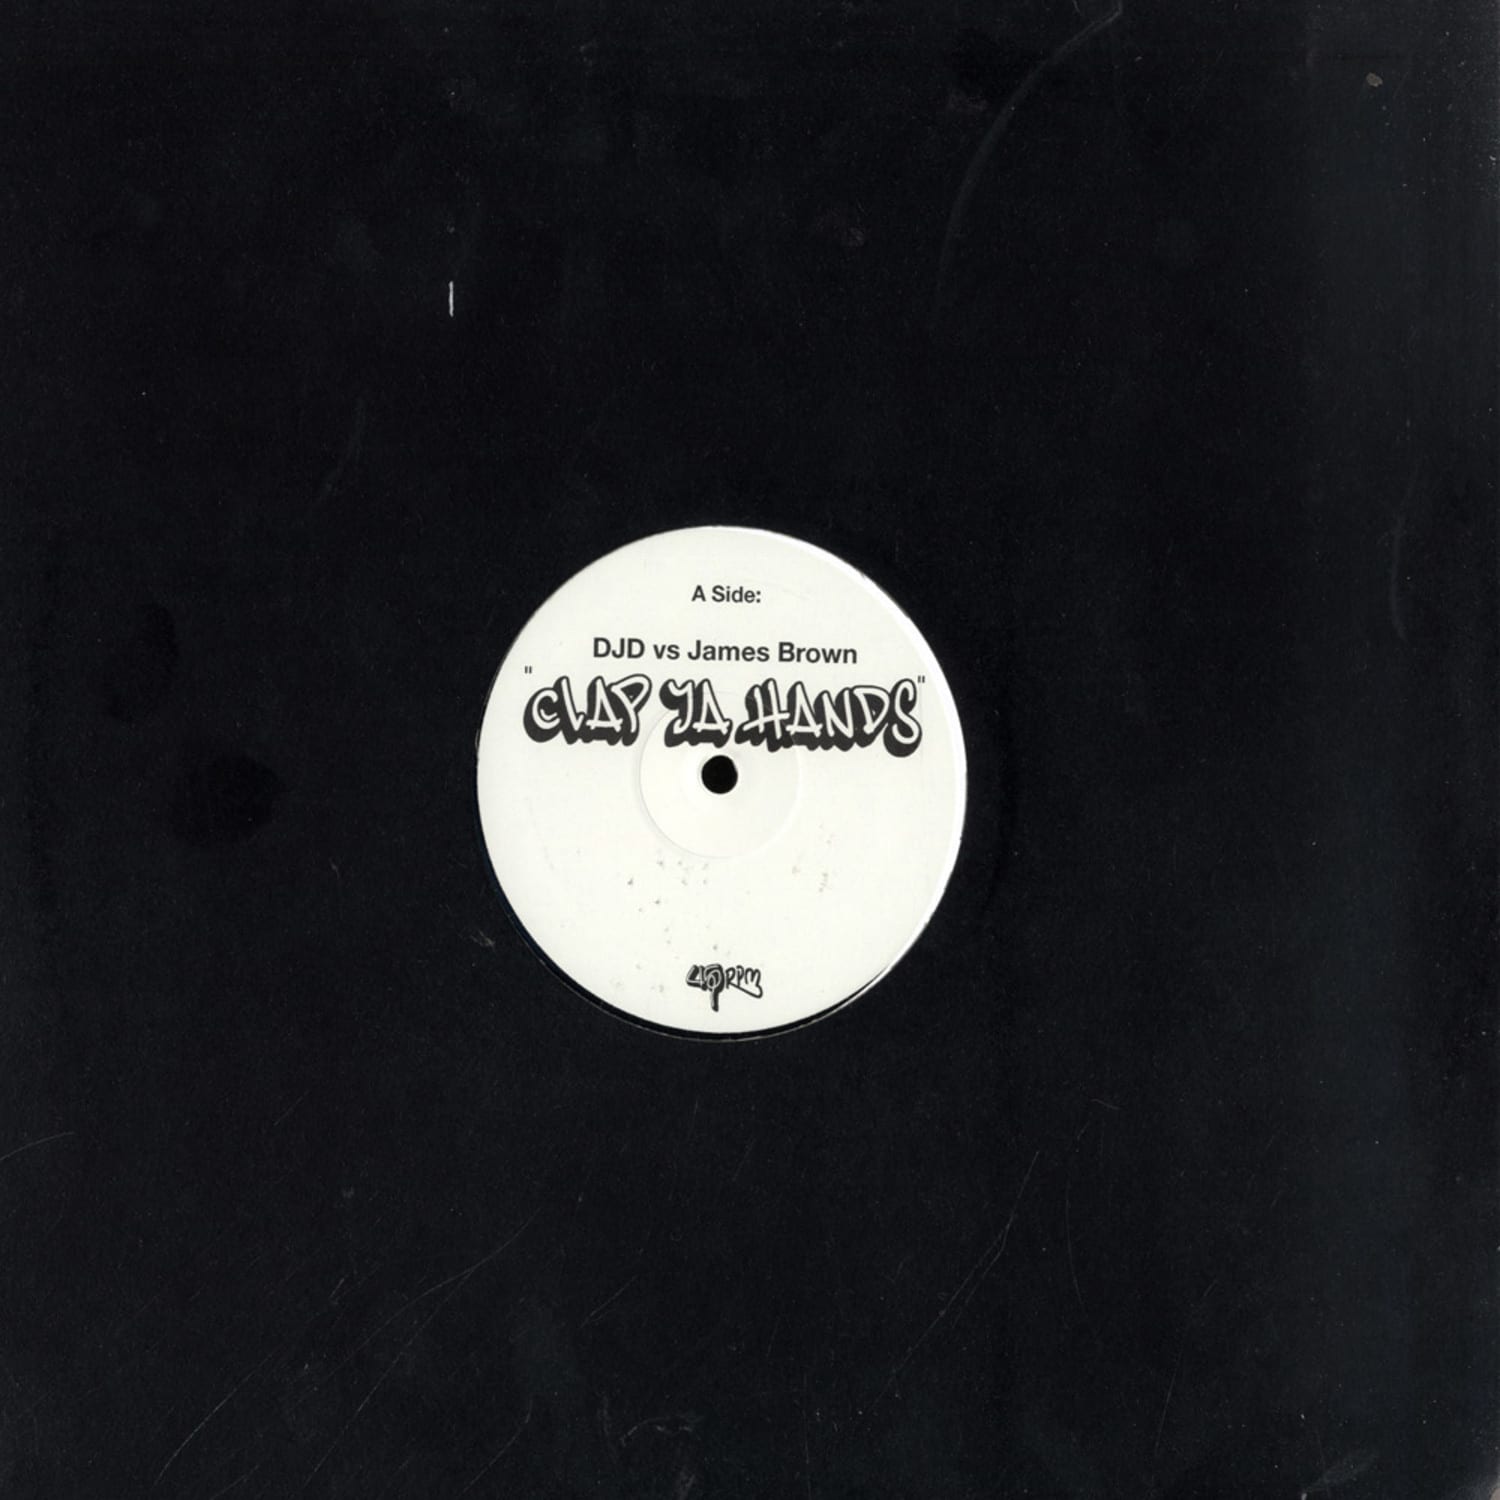 DJD vs James Brown & The Jungle Brothers - CLAP YOUR HANDS / ILL HOUZE YOU